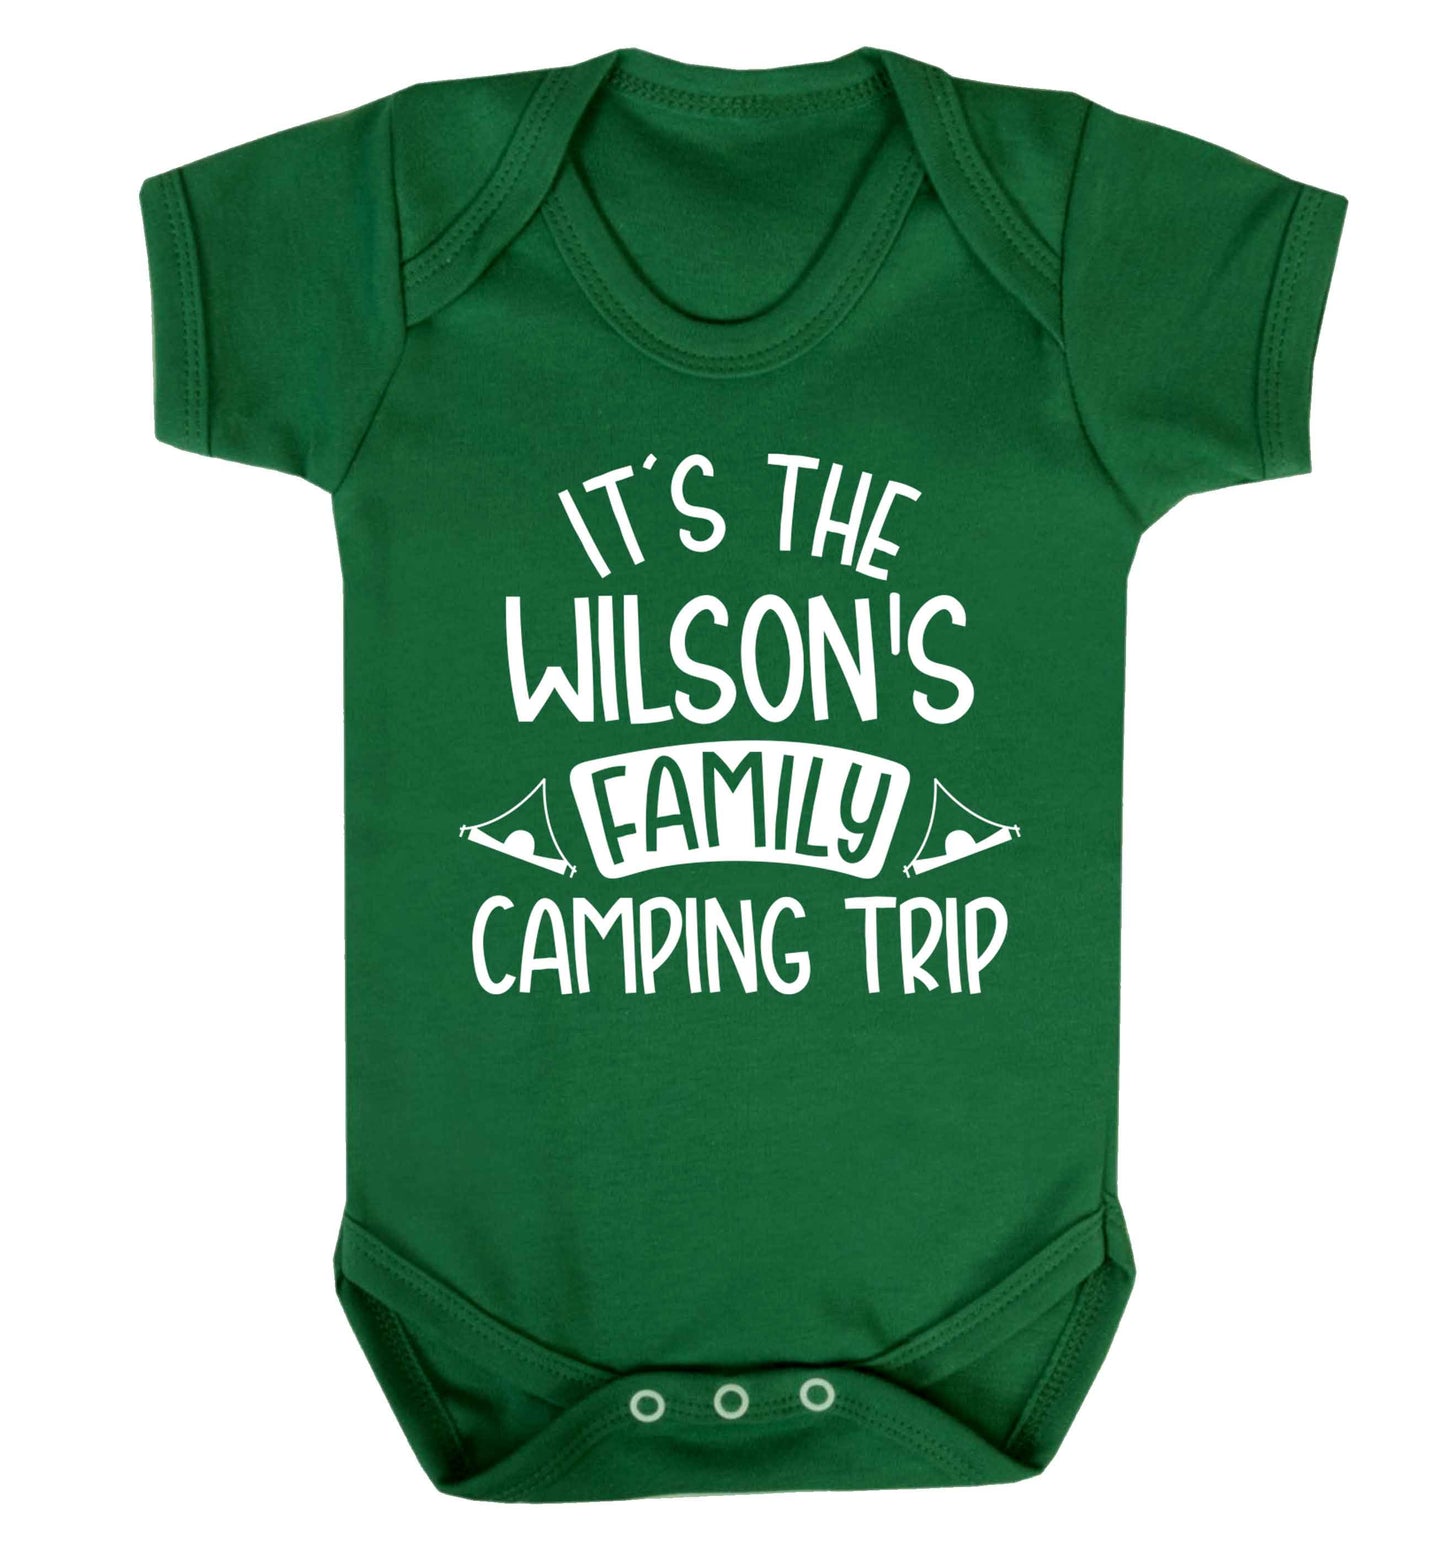 It's the Wilson's family camping trip personalised Baby Vest green 18-24 months